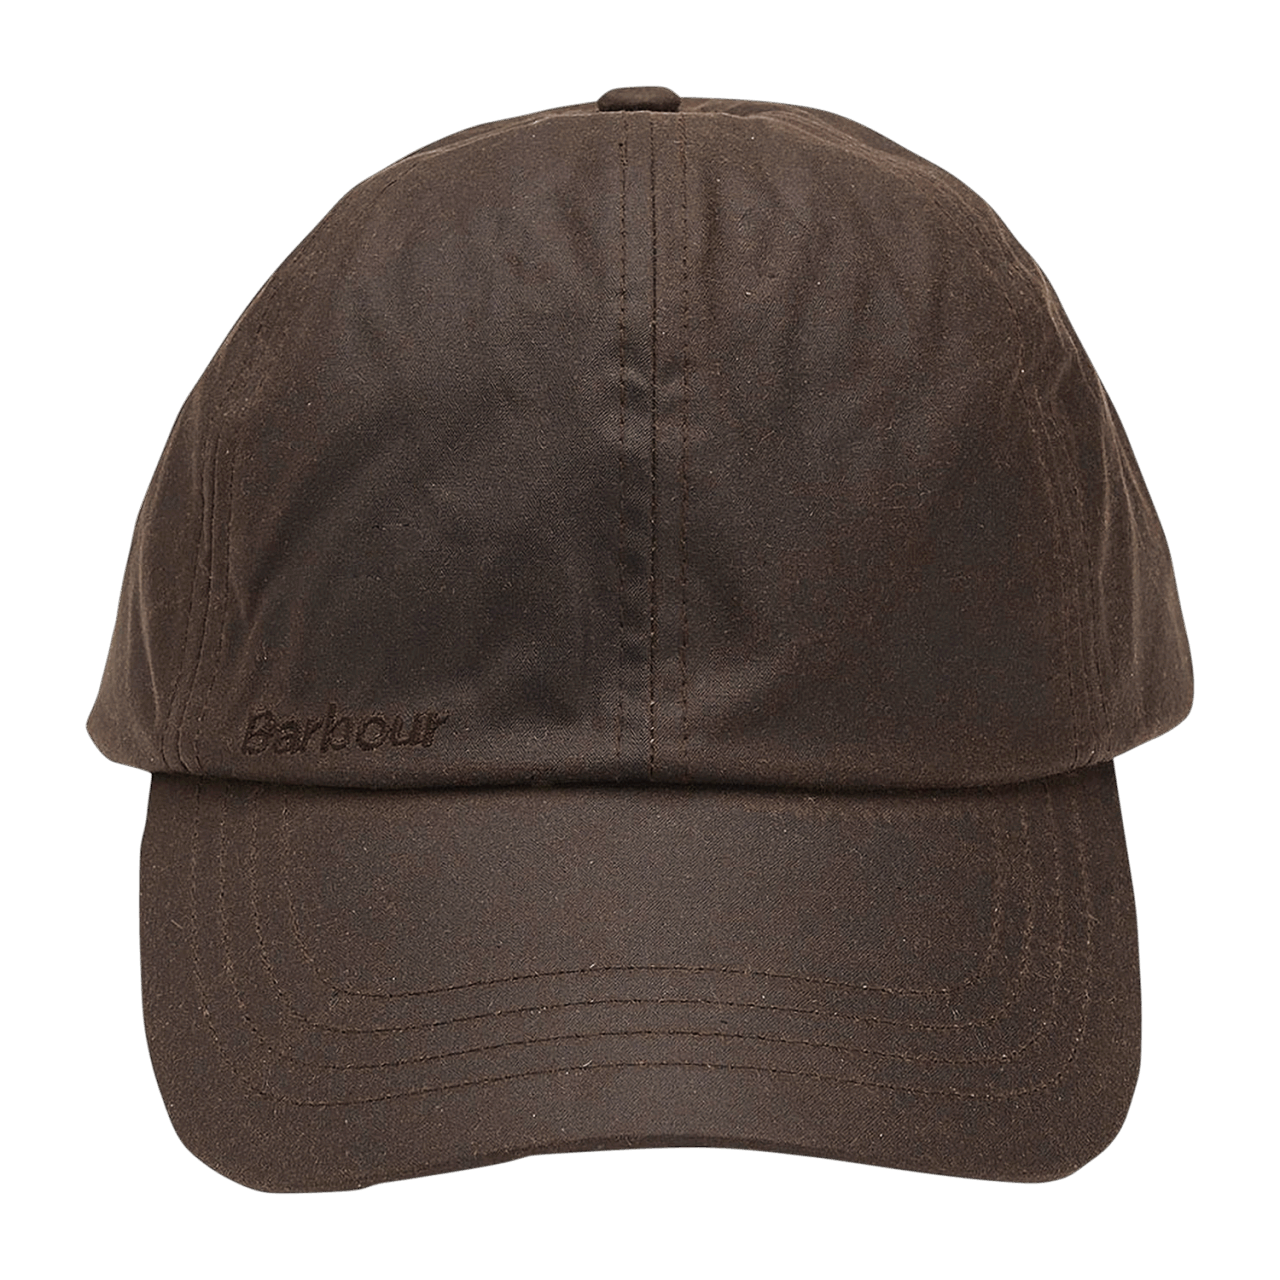 Barbour Waxed Sports Cap - rustic